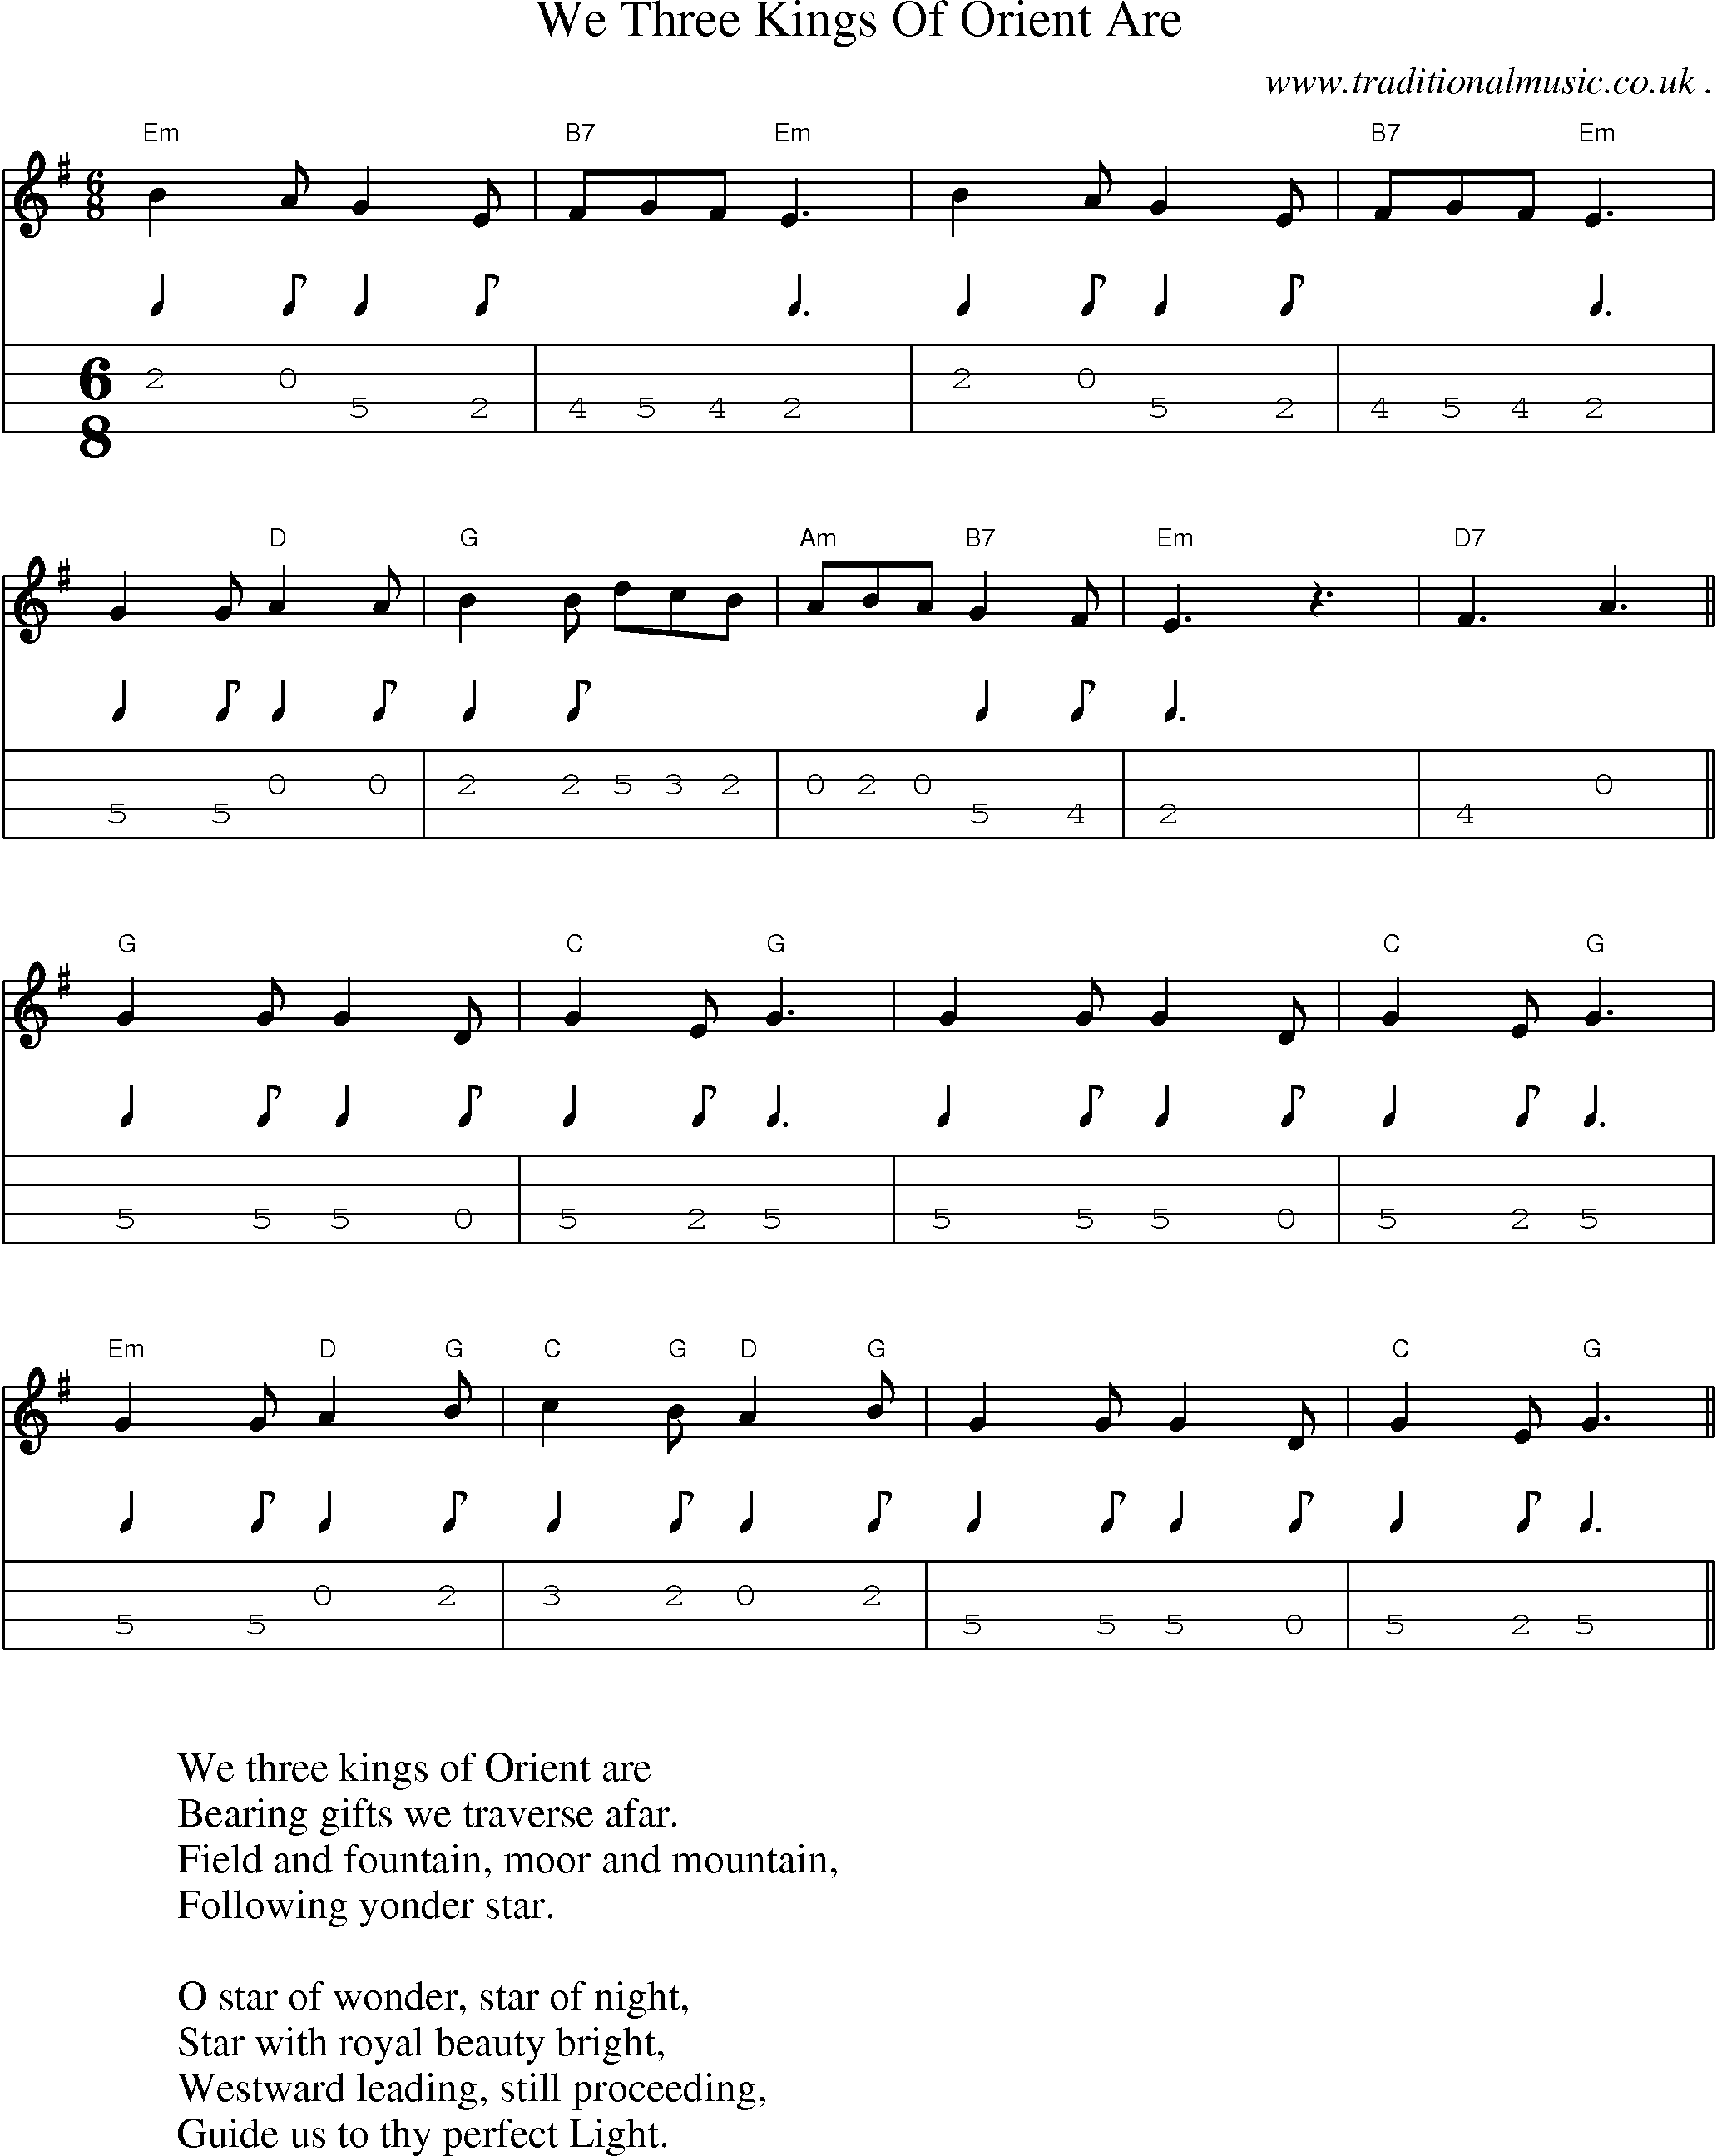 Music Score and Guitar Tabs for We Three Kings Of Orient Are